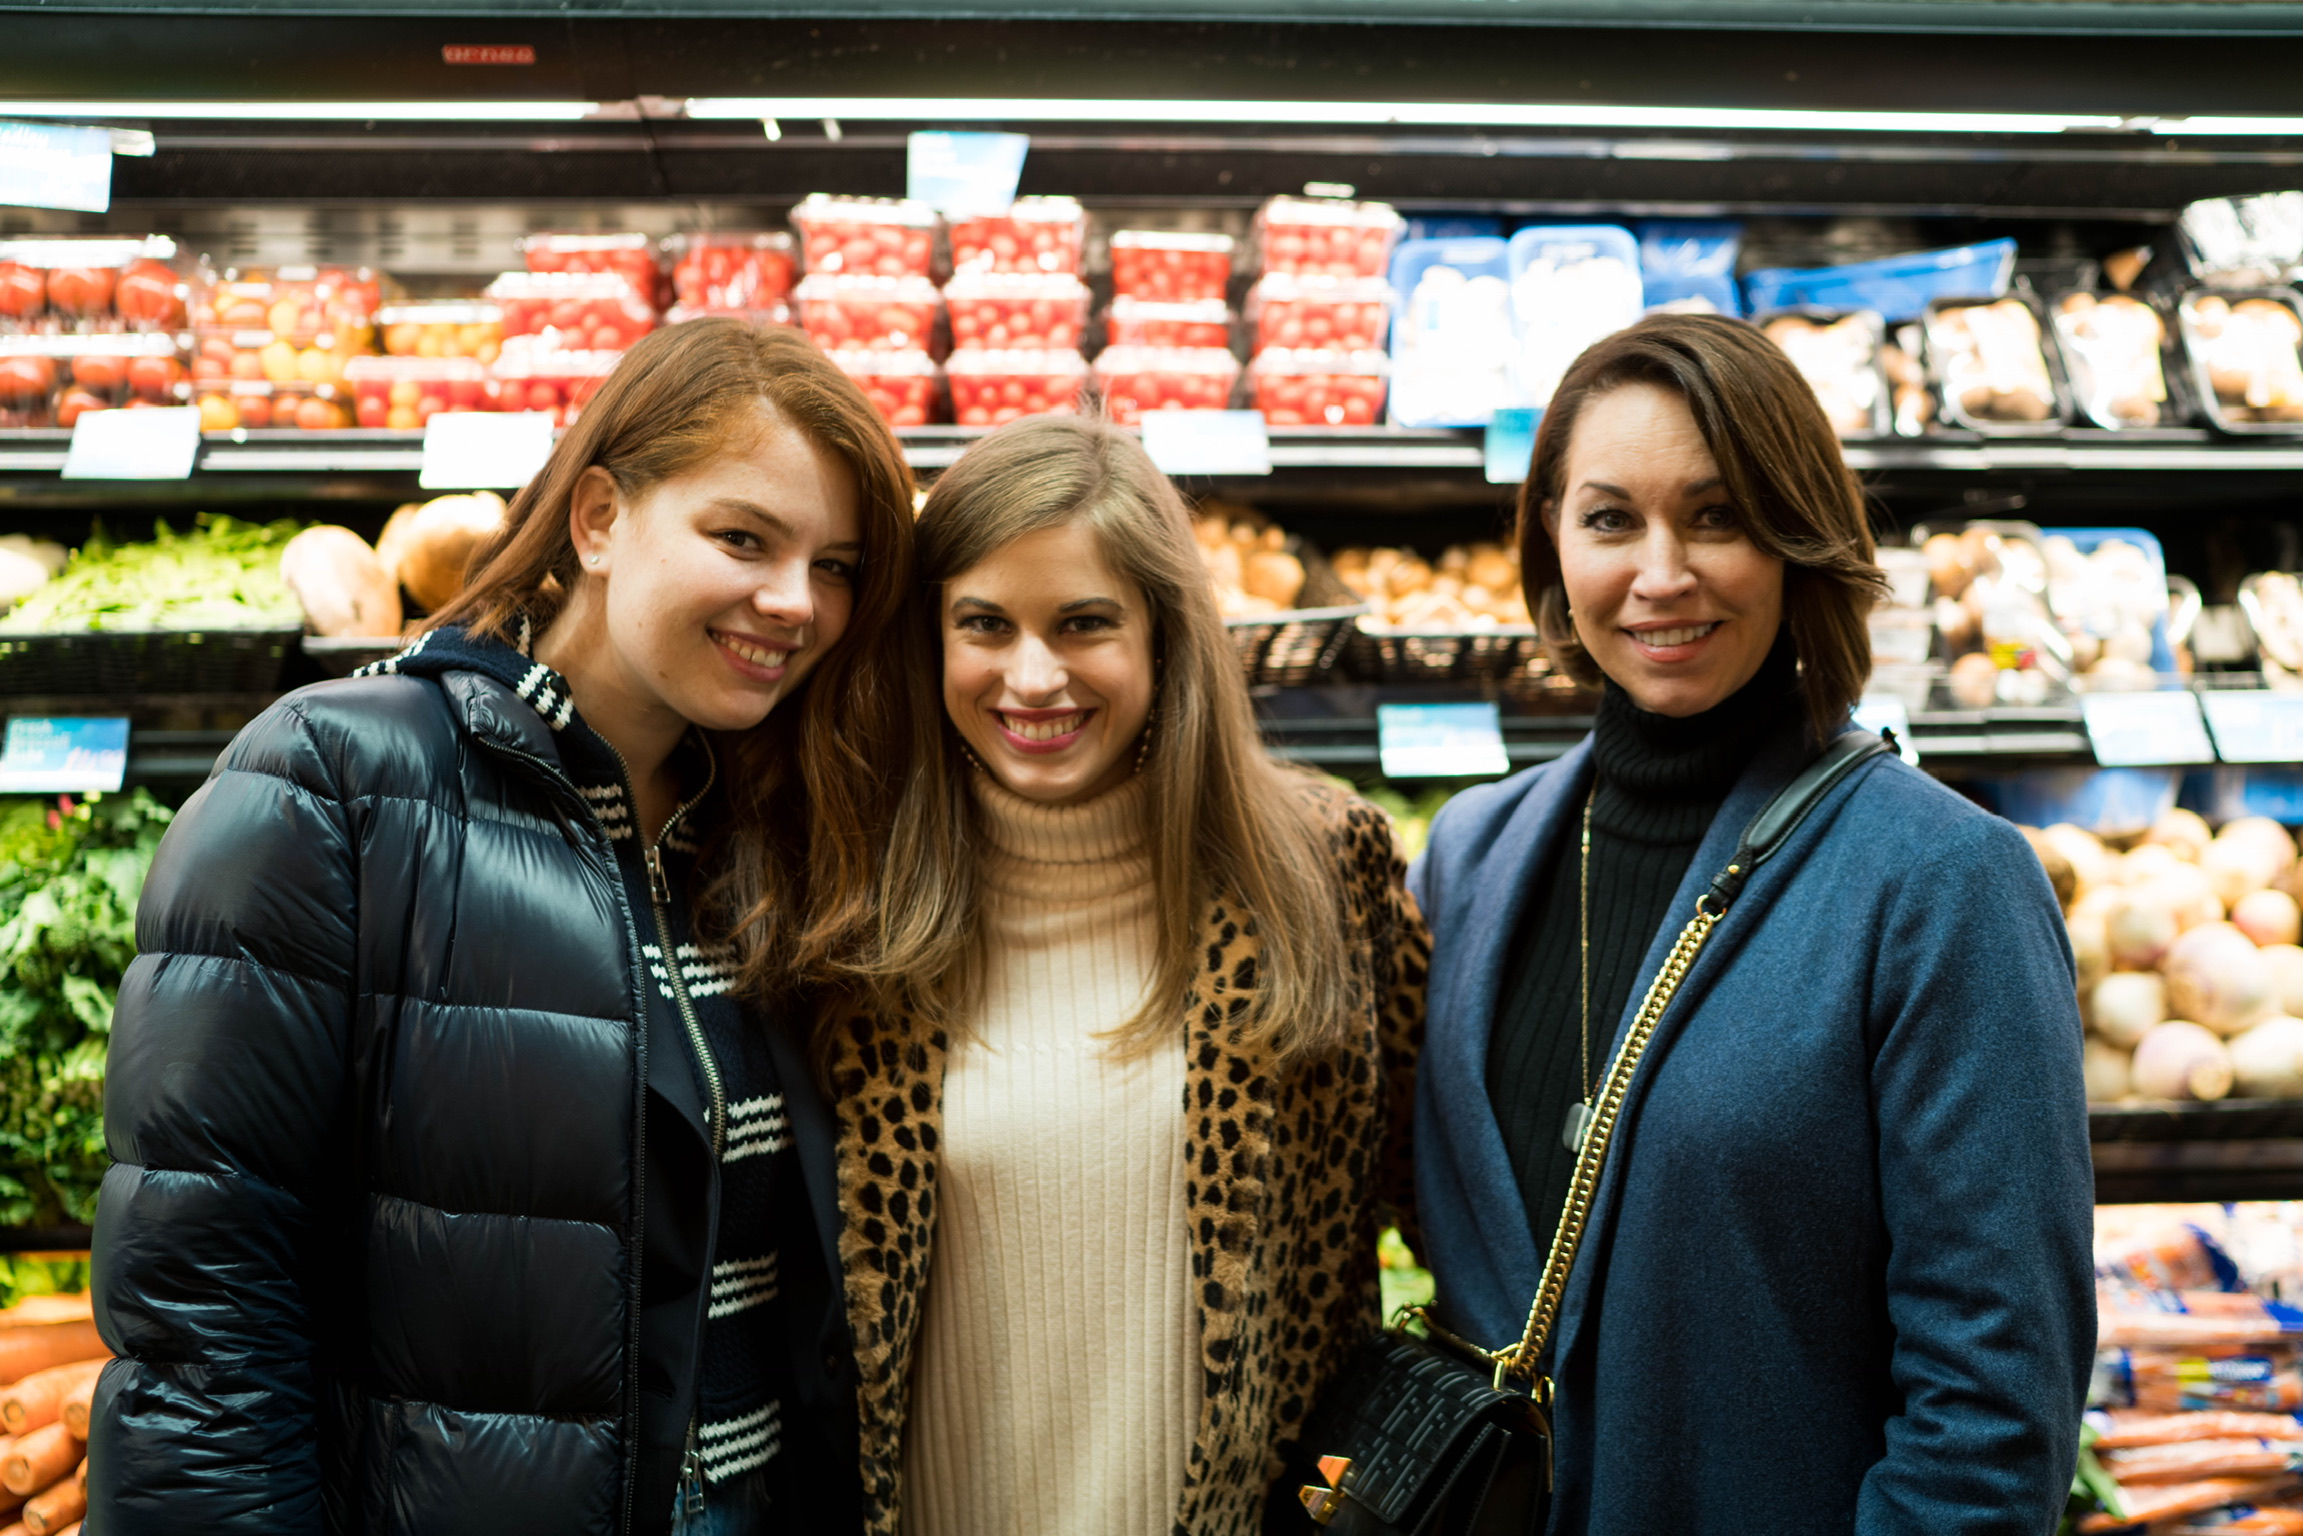 Three women in a grocery store: one wearing a puffer jacket, one wearing a cream turtleneck sweater and leopard print coat, the last is wearing a blue coat and a black turtleneck sweater. One has red hair and the other two have brown hair